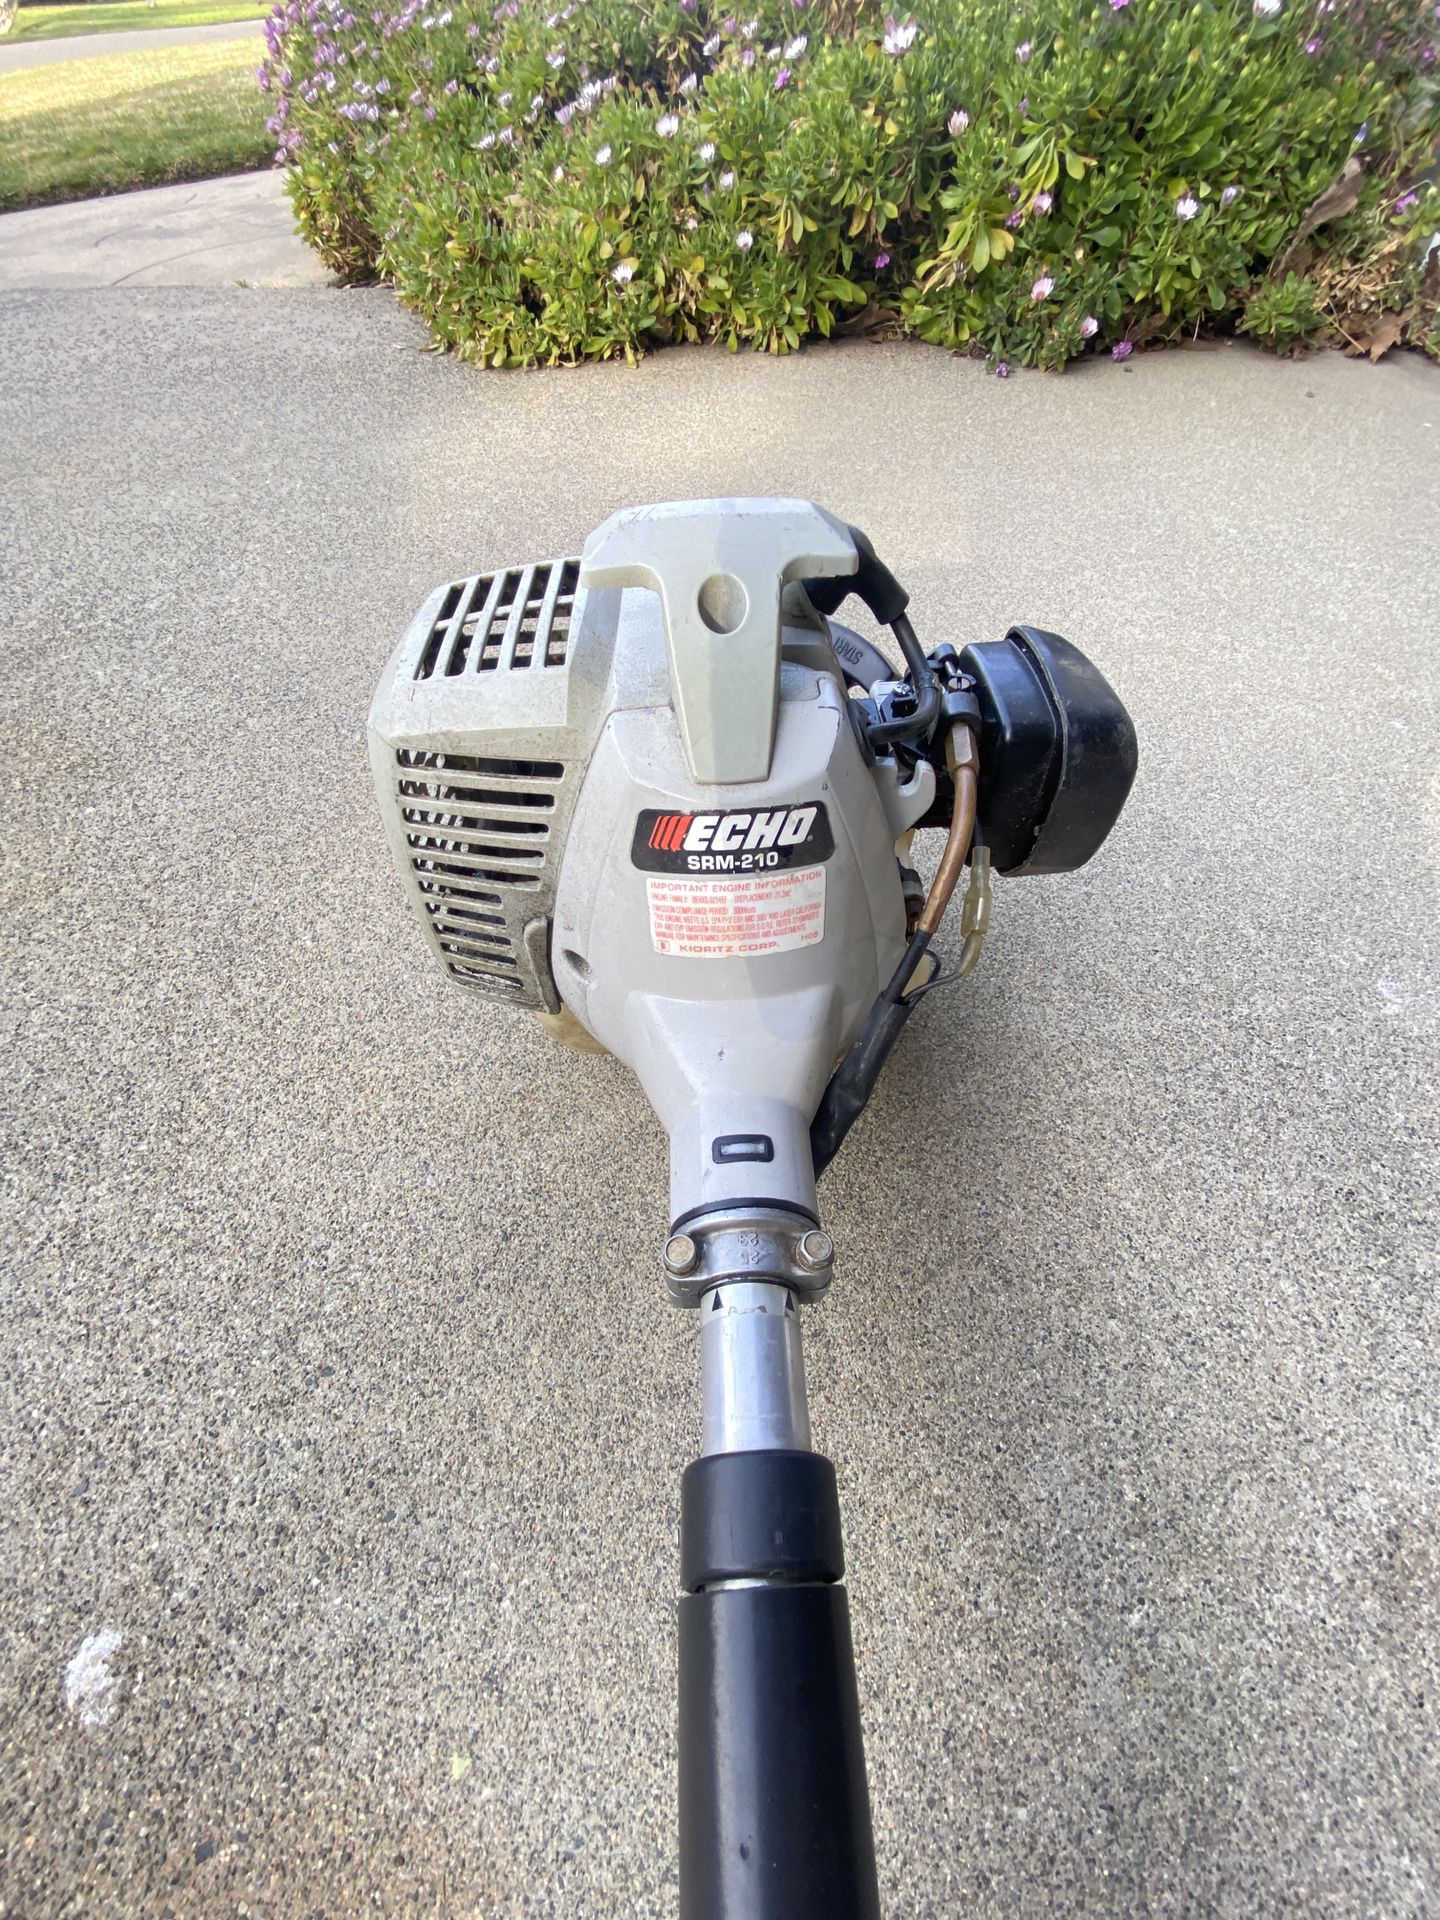 Black & Decker 24volt NST1024 Weed Eater With Battery for Sale in Temecula,  CA - OfferUp